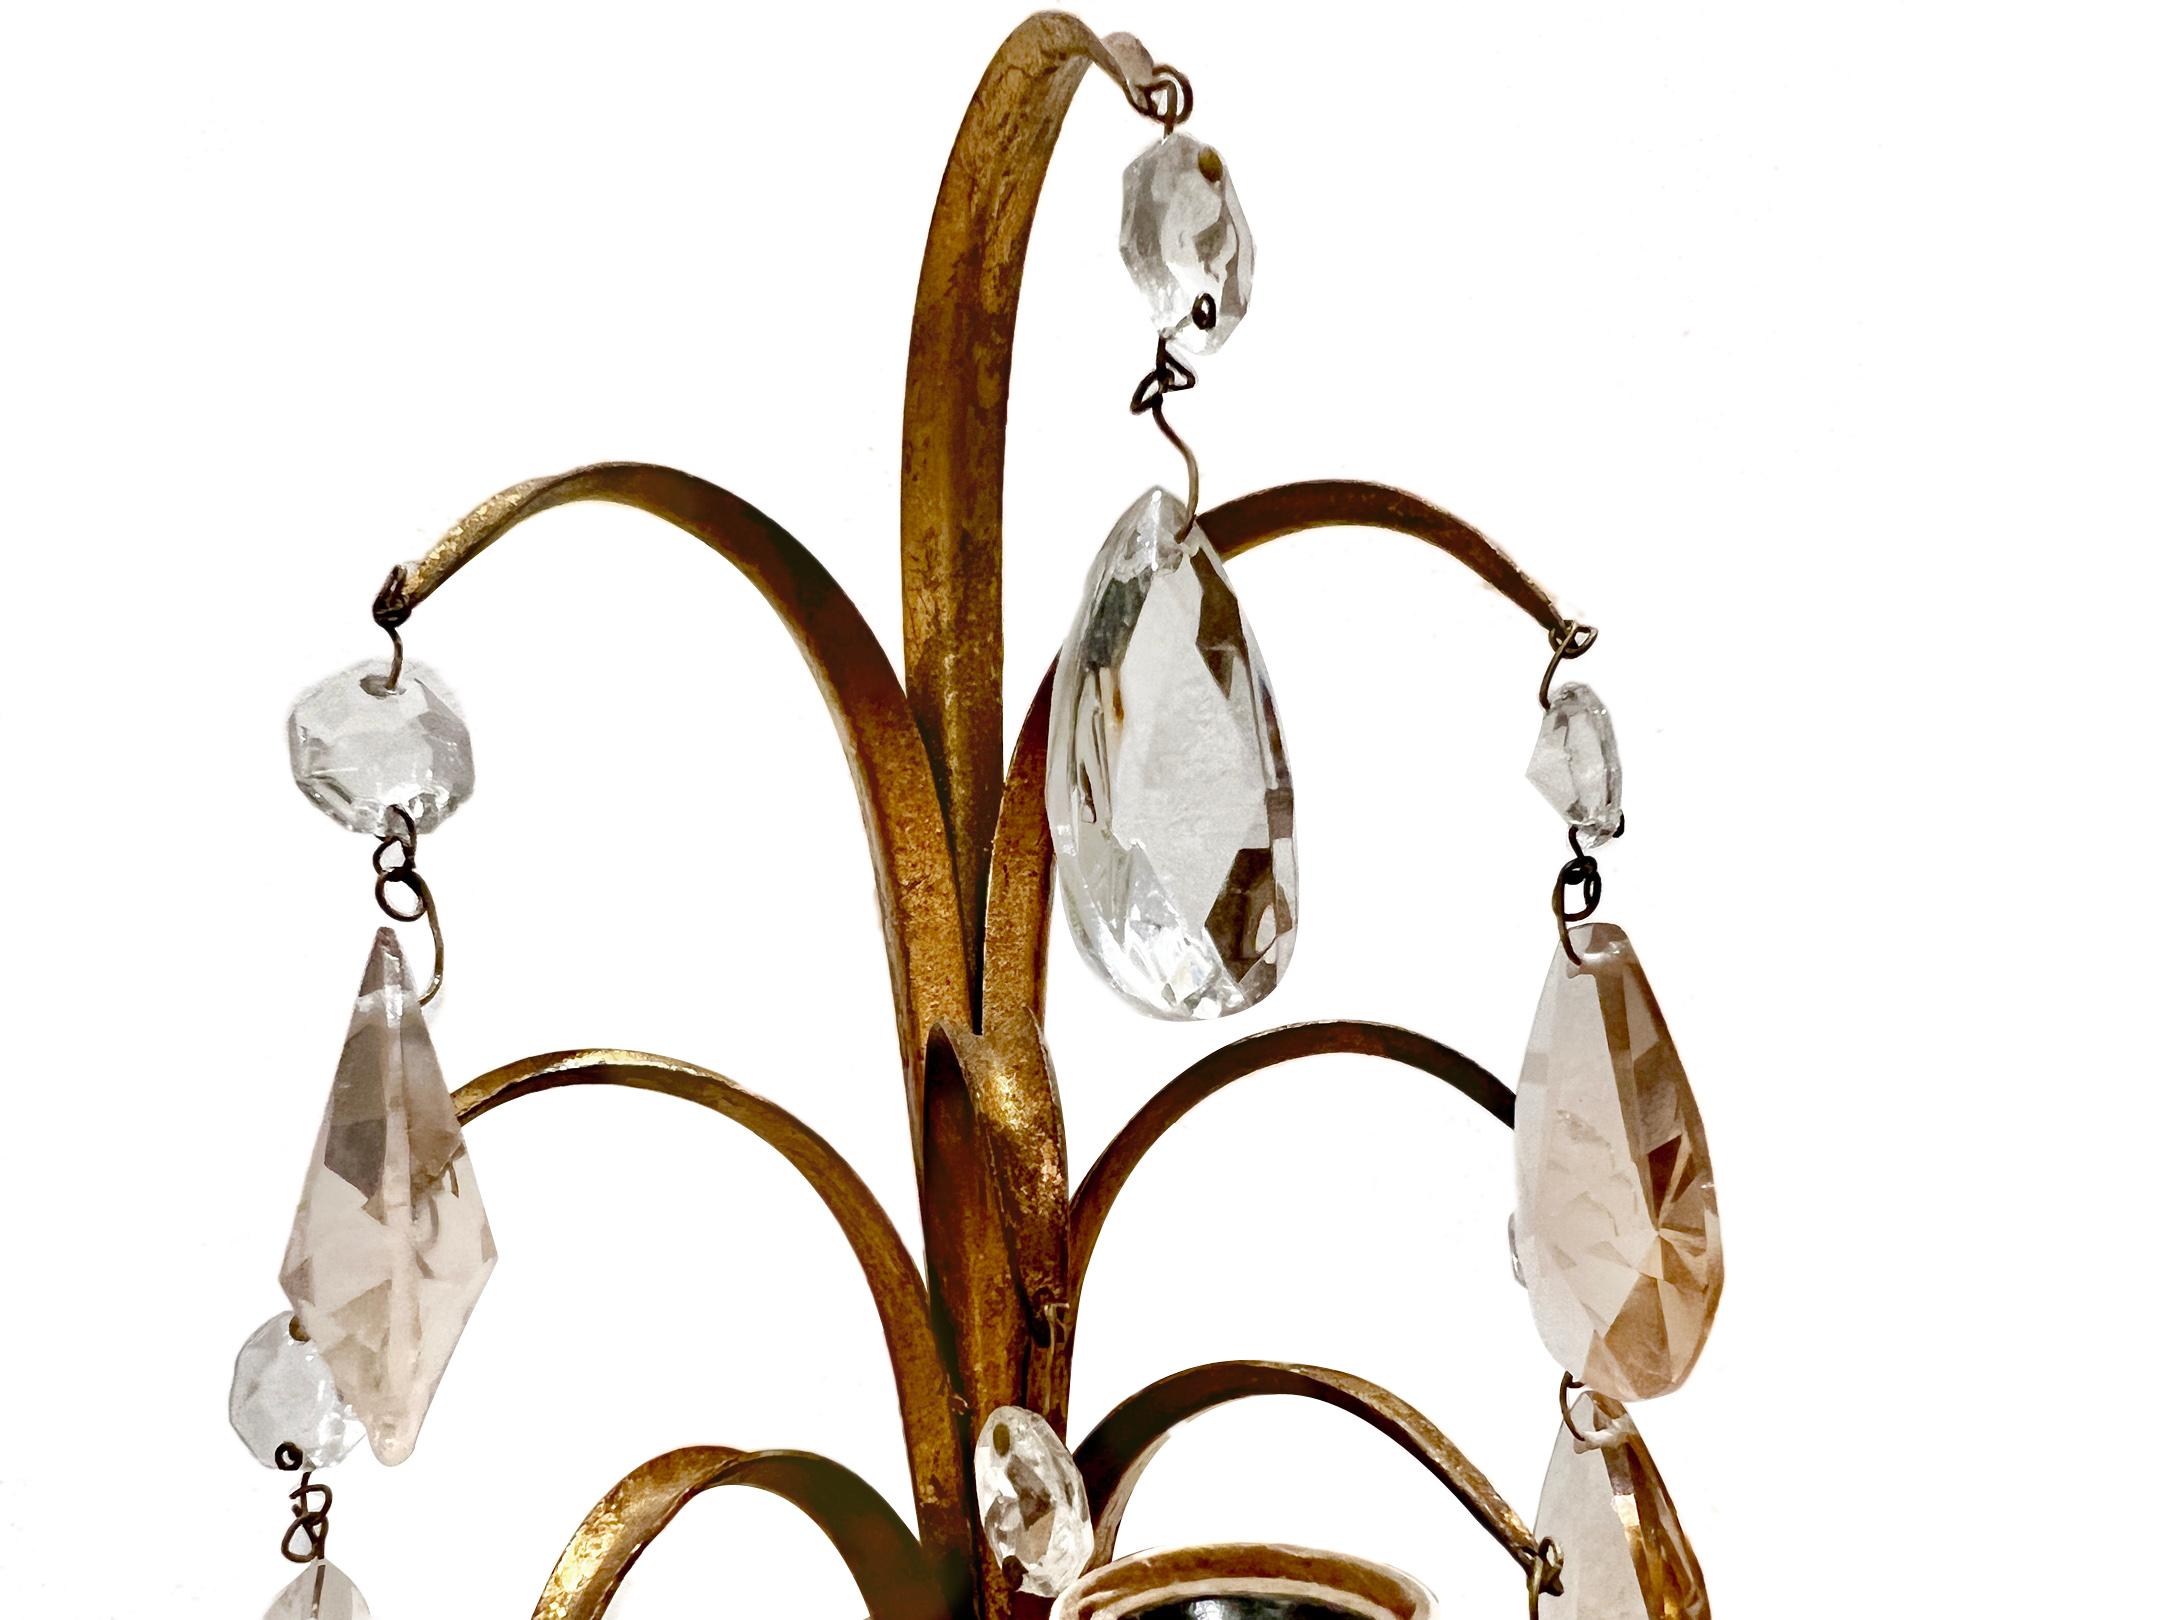 A pair of circa 1950's Italian gilt metal sconces with clear and rose-colored crystals, original patina.

Measurements:
Height: 14